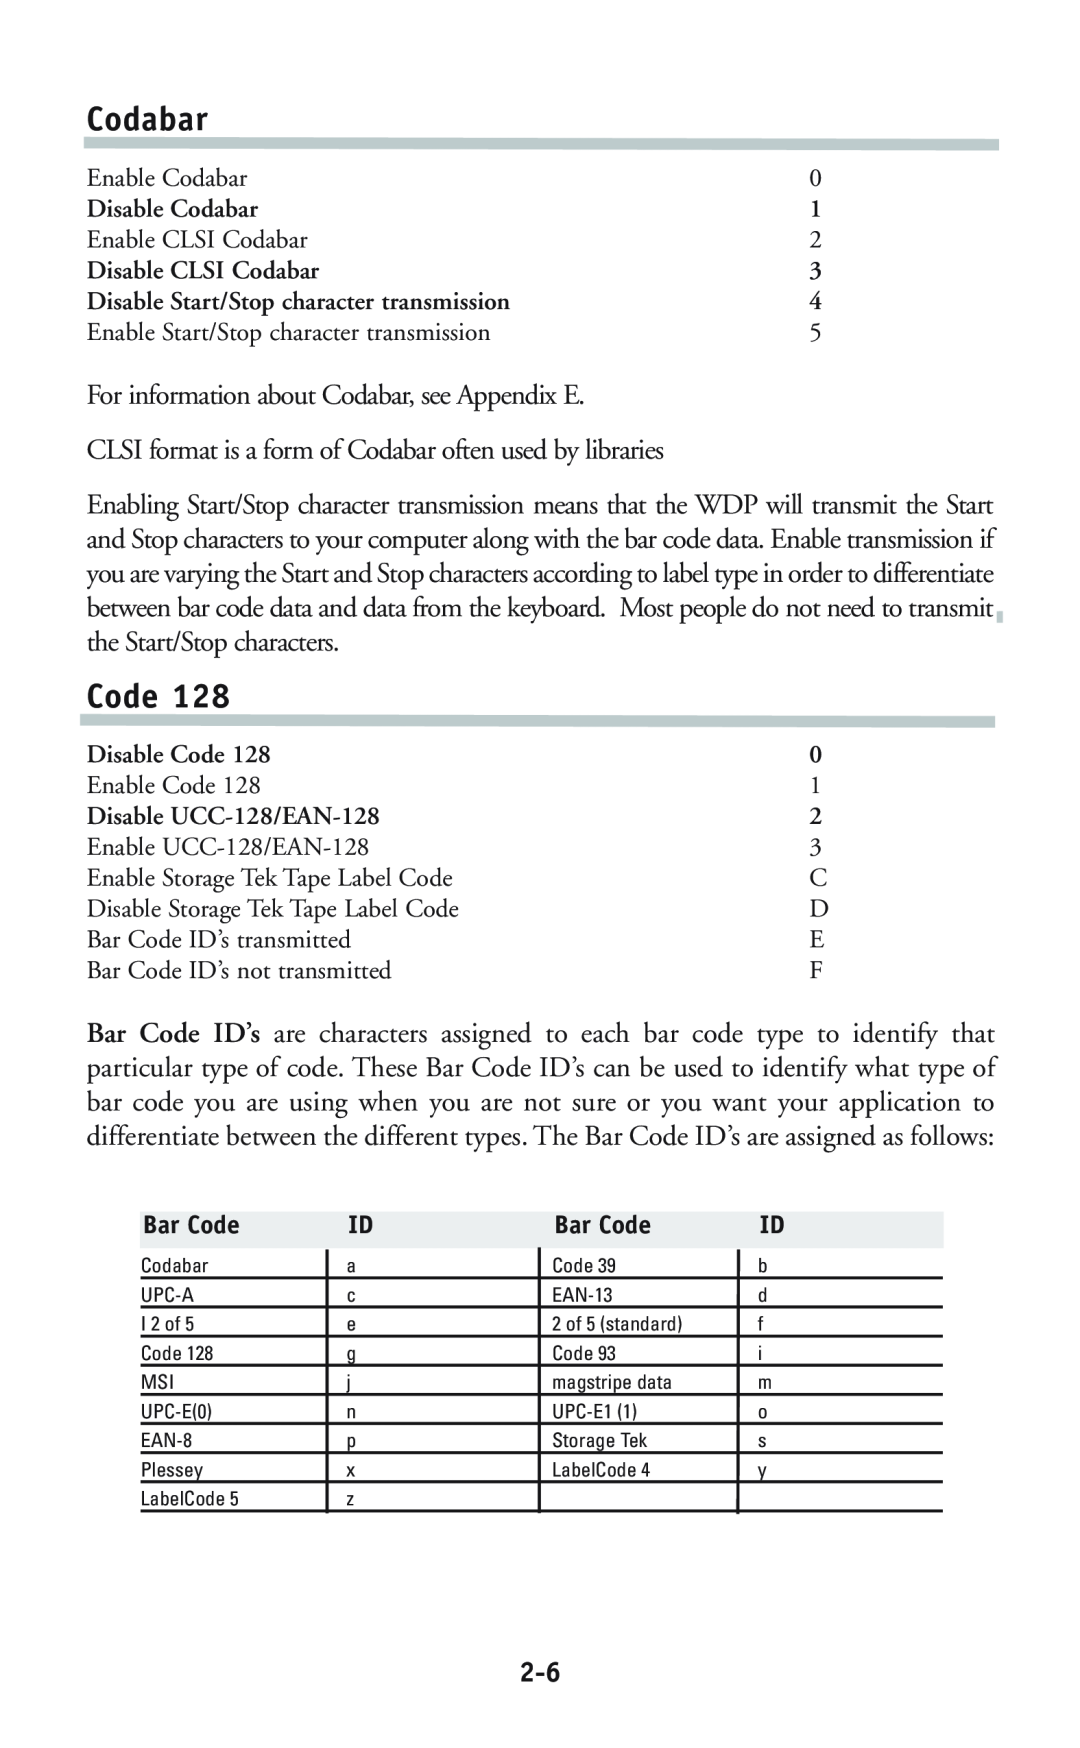 Worth Data P11/12 user manual Code, For information about Codabar, see Appendix E 